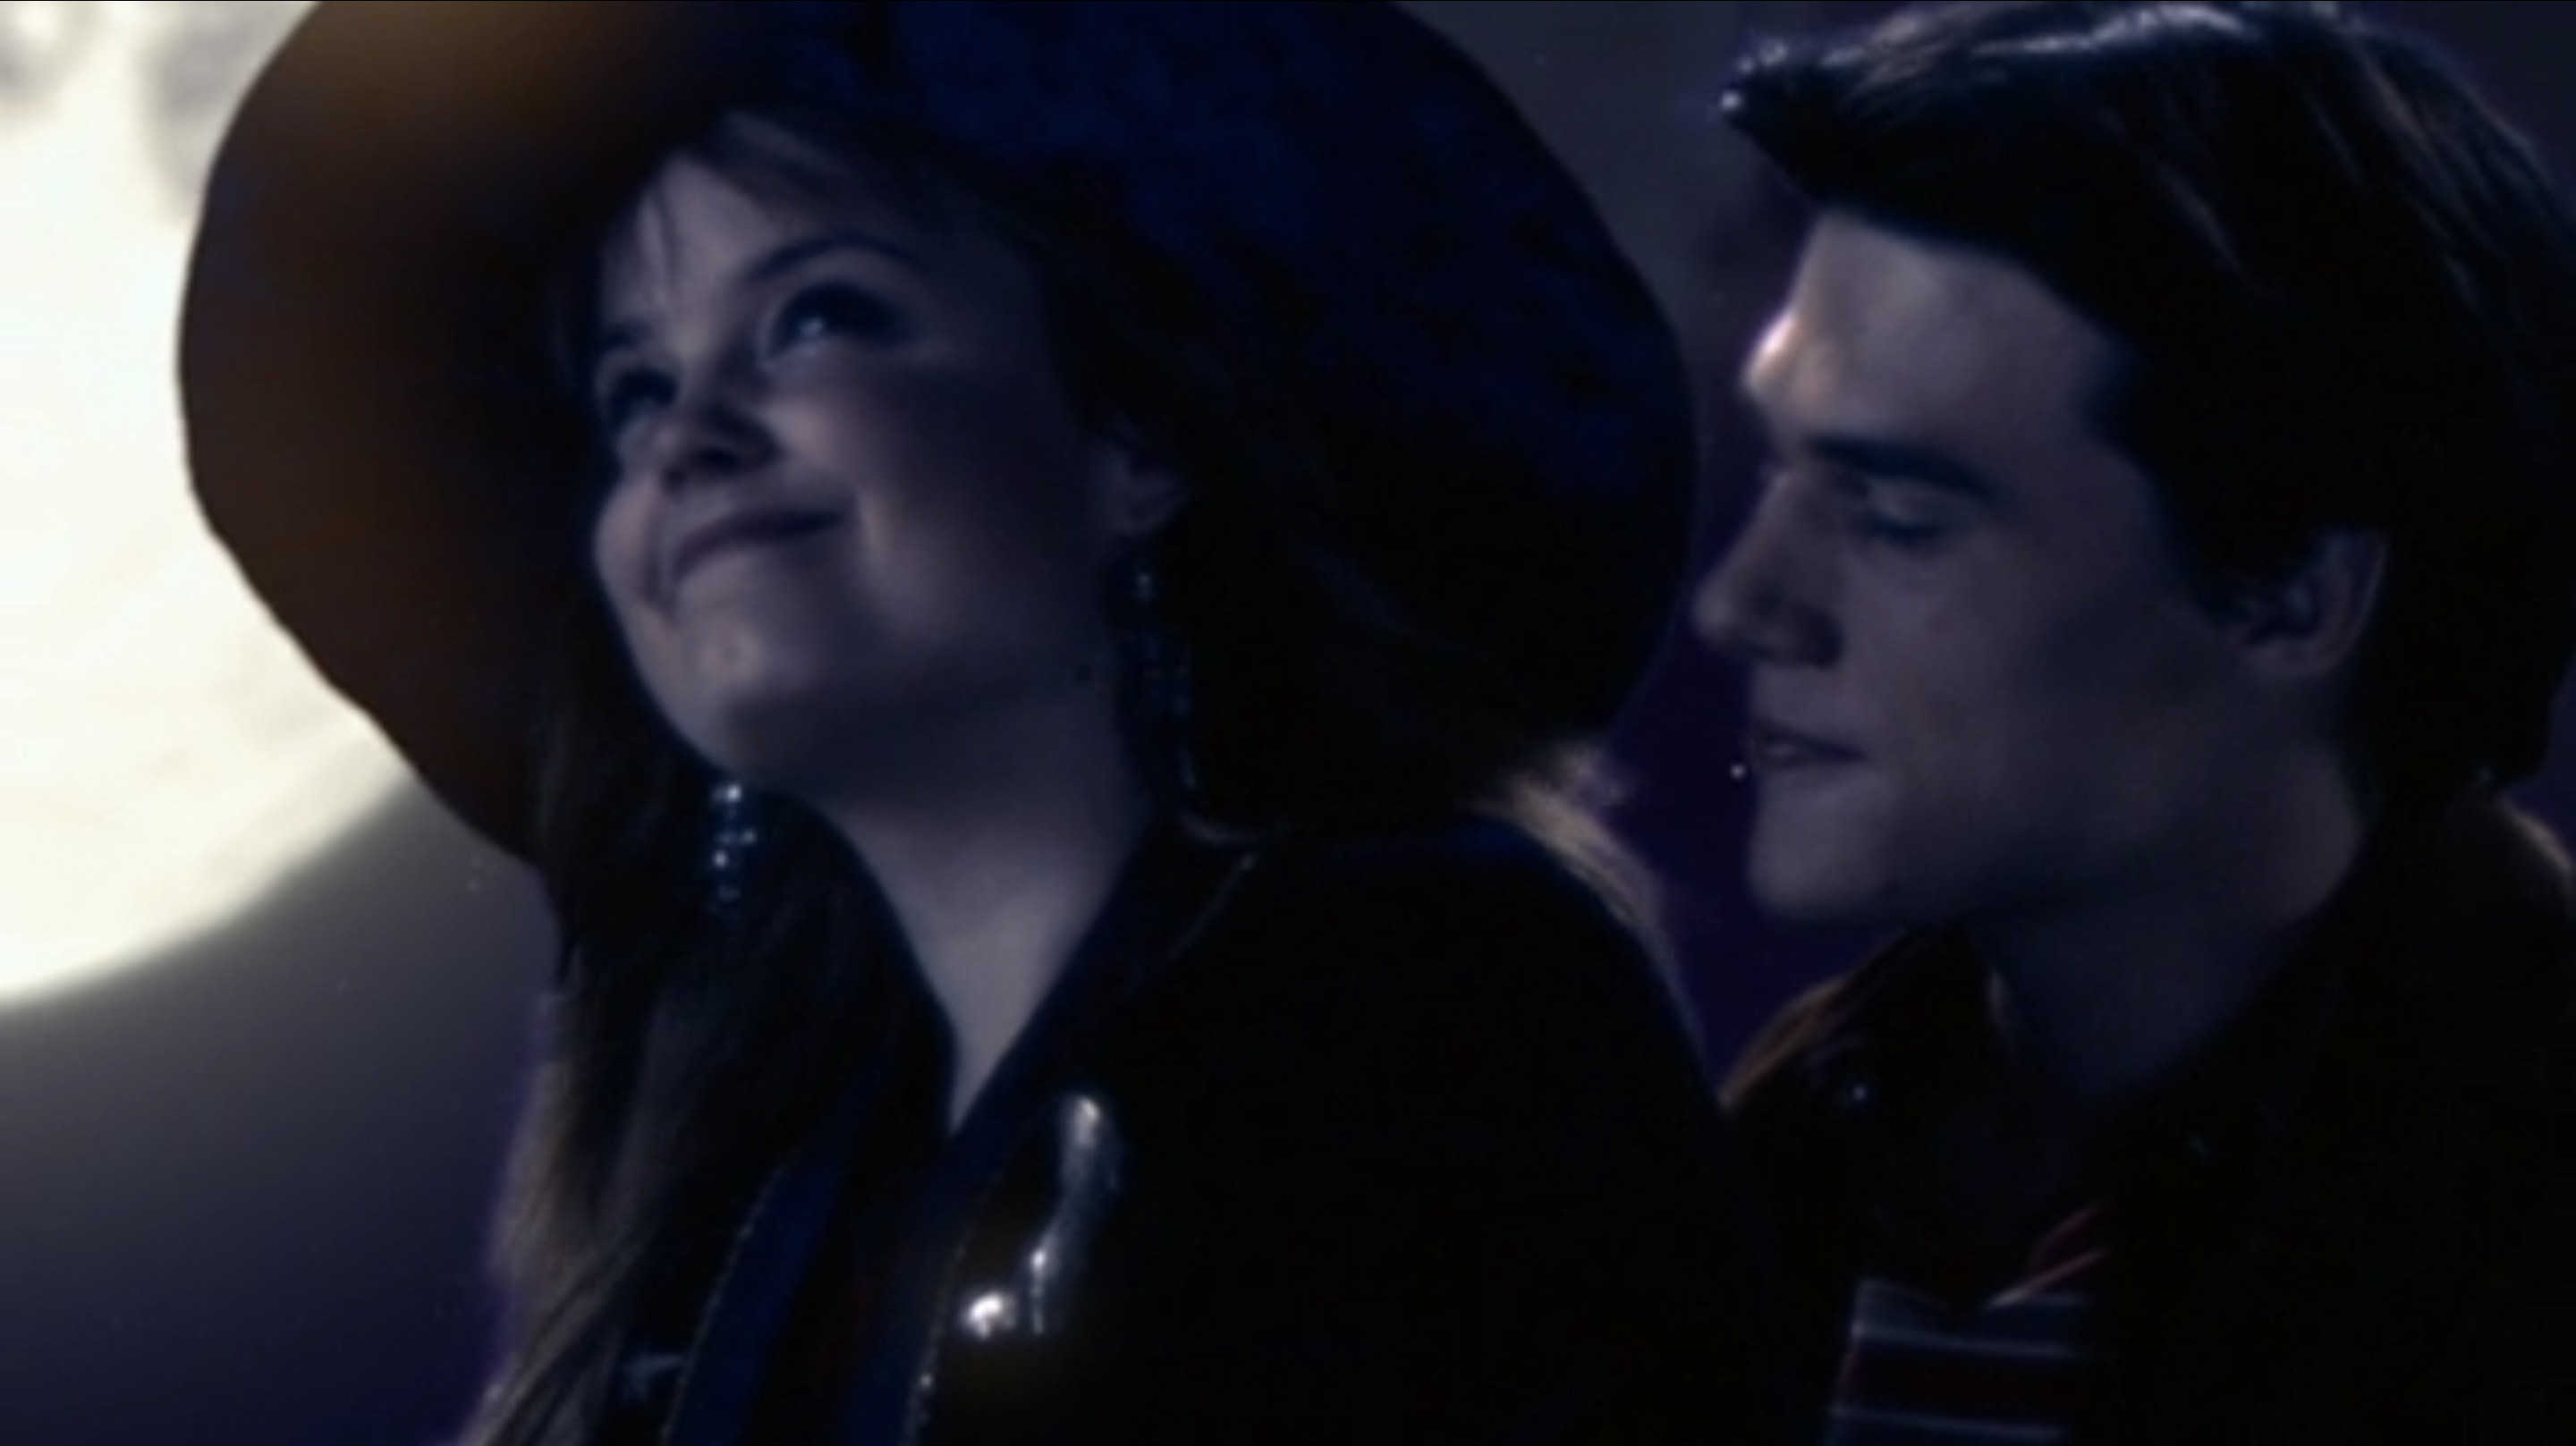 Kimberly J. Brown as Marnie Piper wears a wide brim hat and smiles at the night sky with Finn Wittrock as Cody behind her in &quot;Halloweentown High&quot;